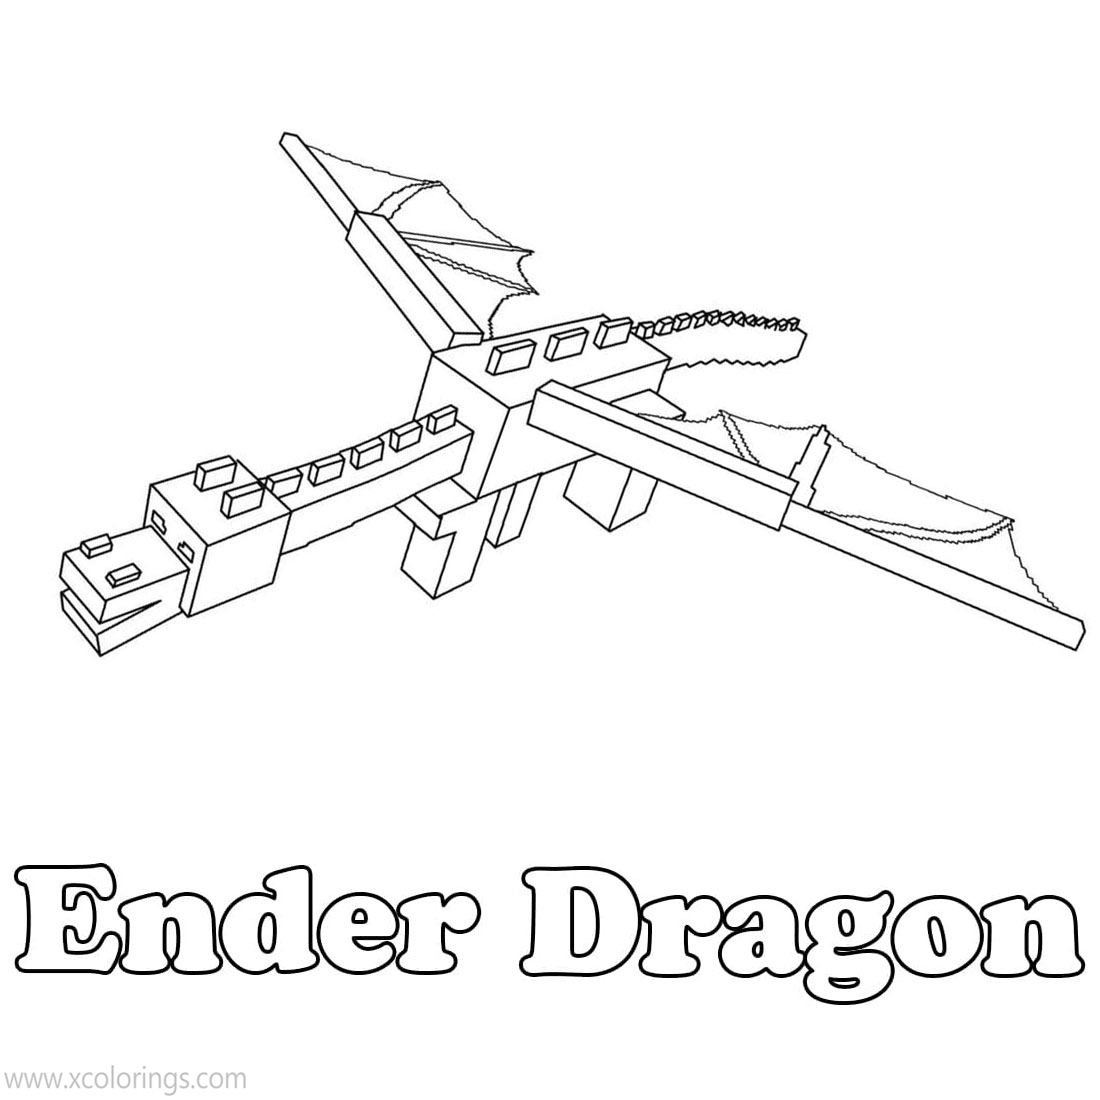 Free Free Ender Dragon Coloring Pages printable